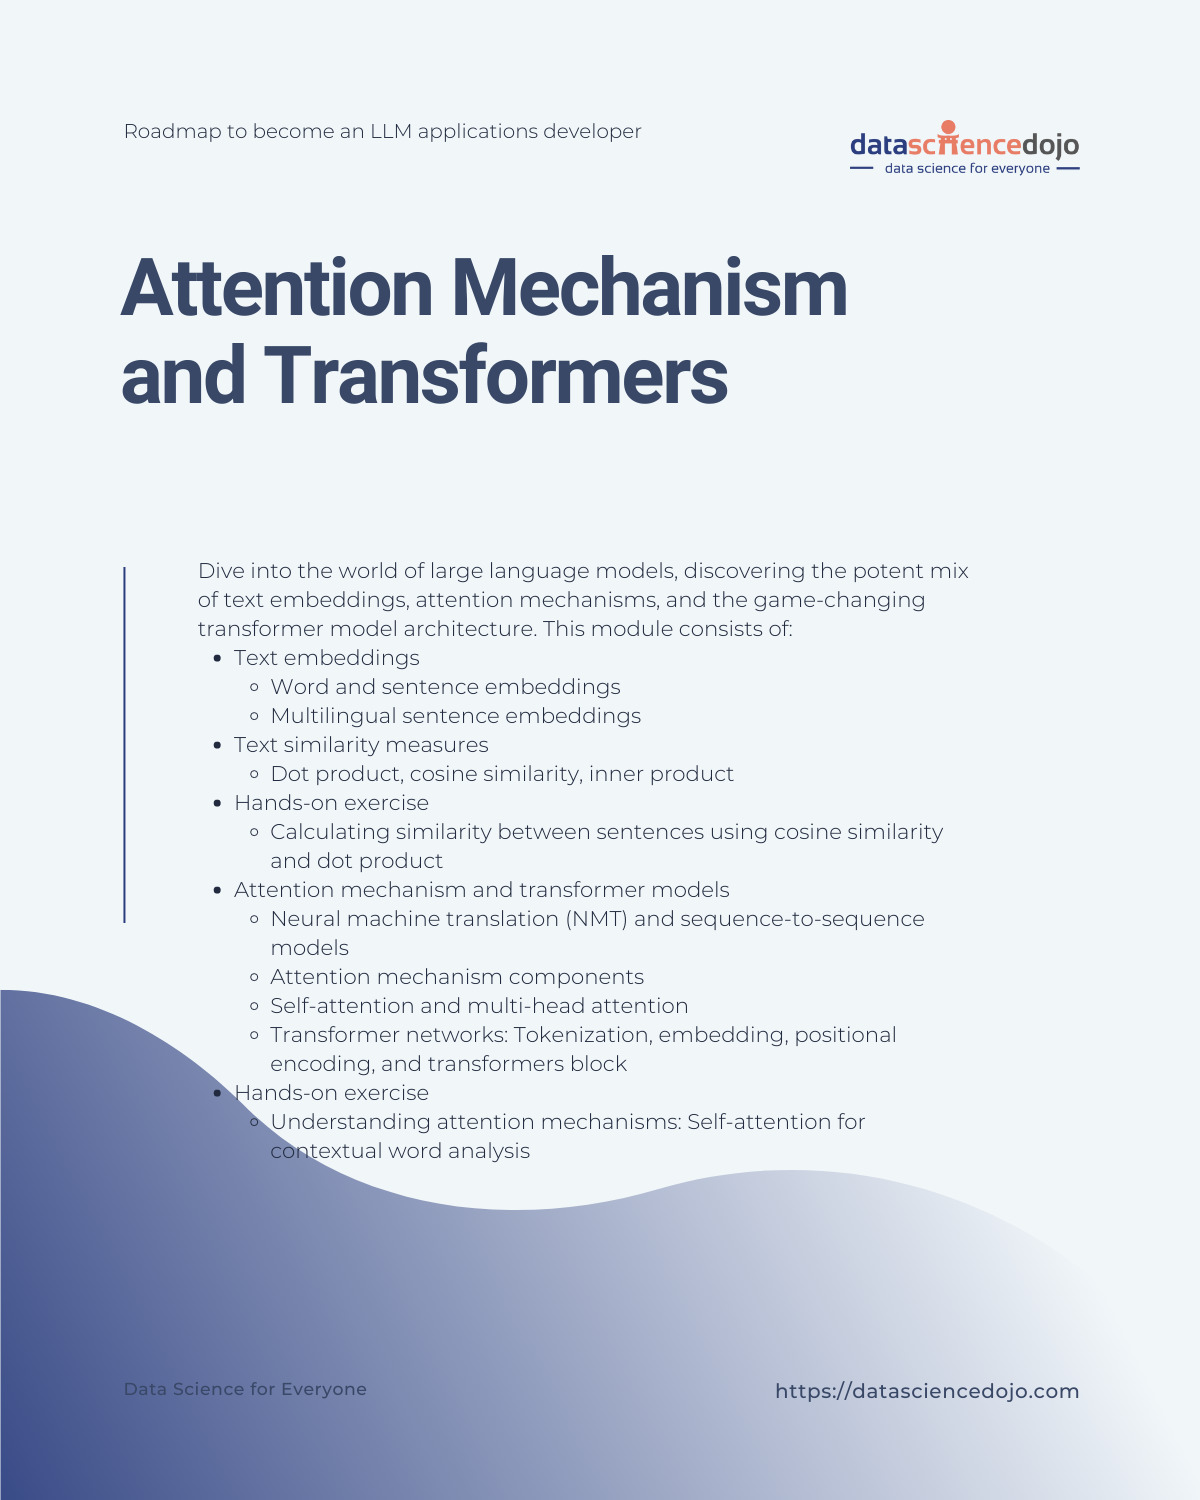 Attention mechanism and transformers - LLM